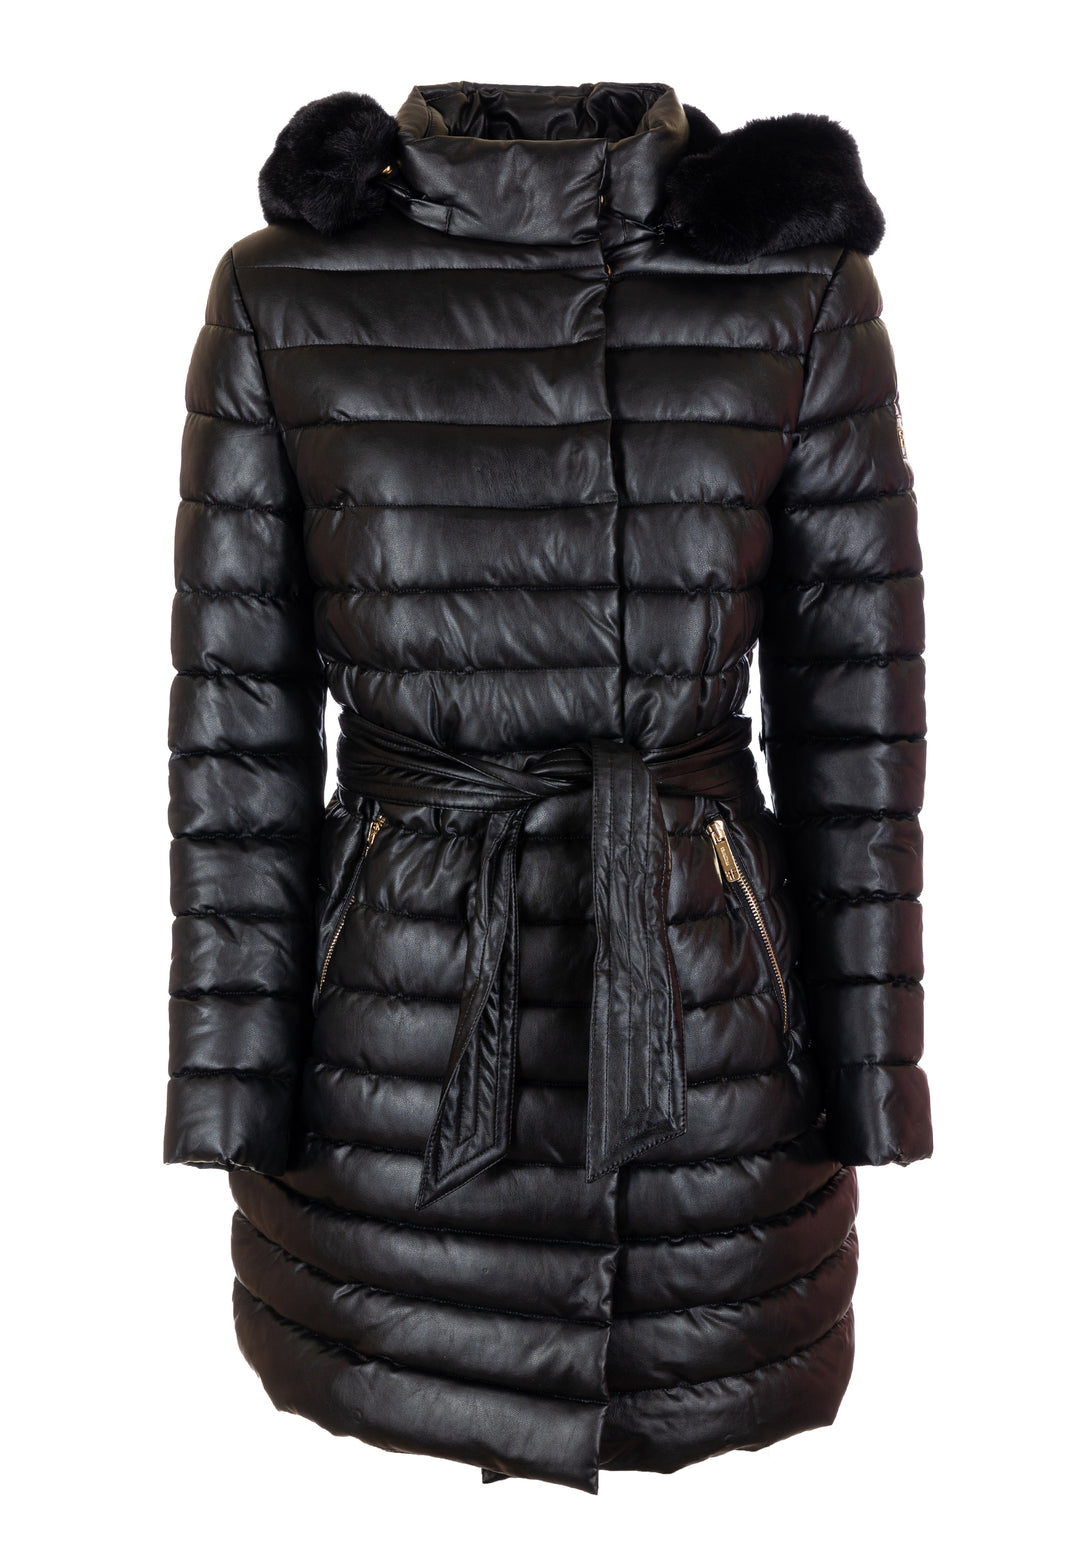 Long padded jacket slim fit made in quilted fabric